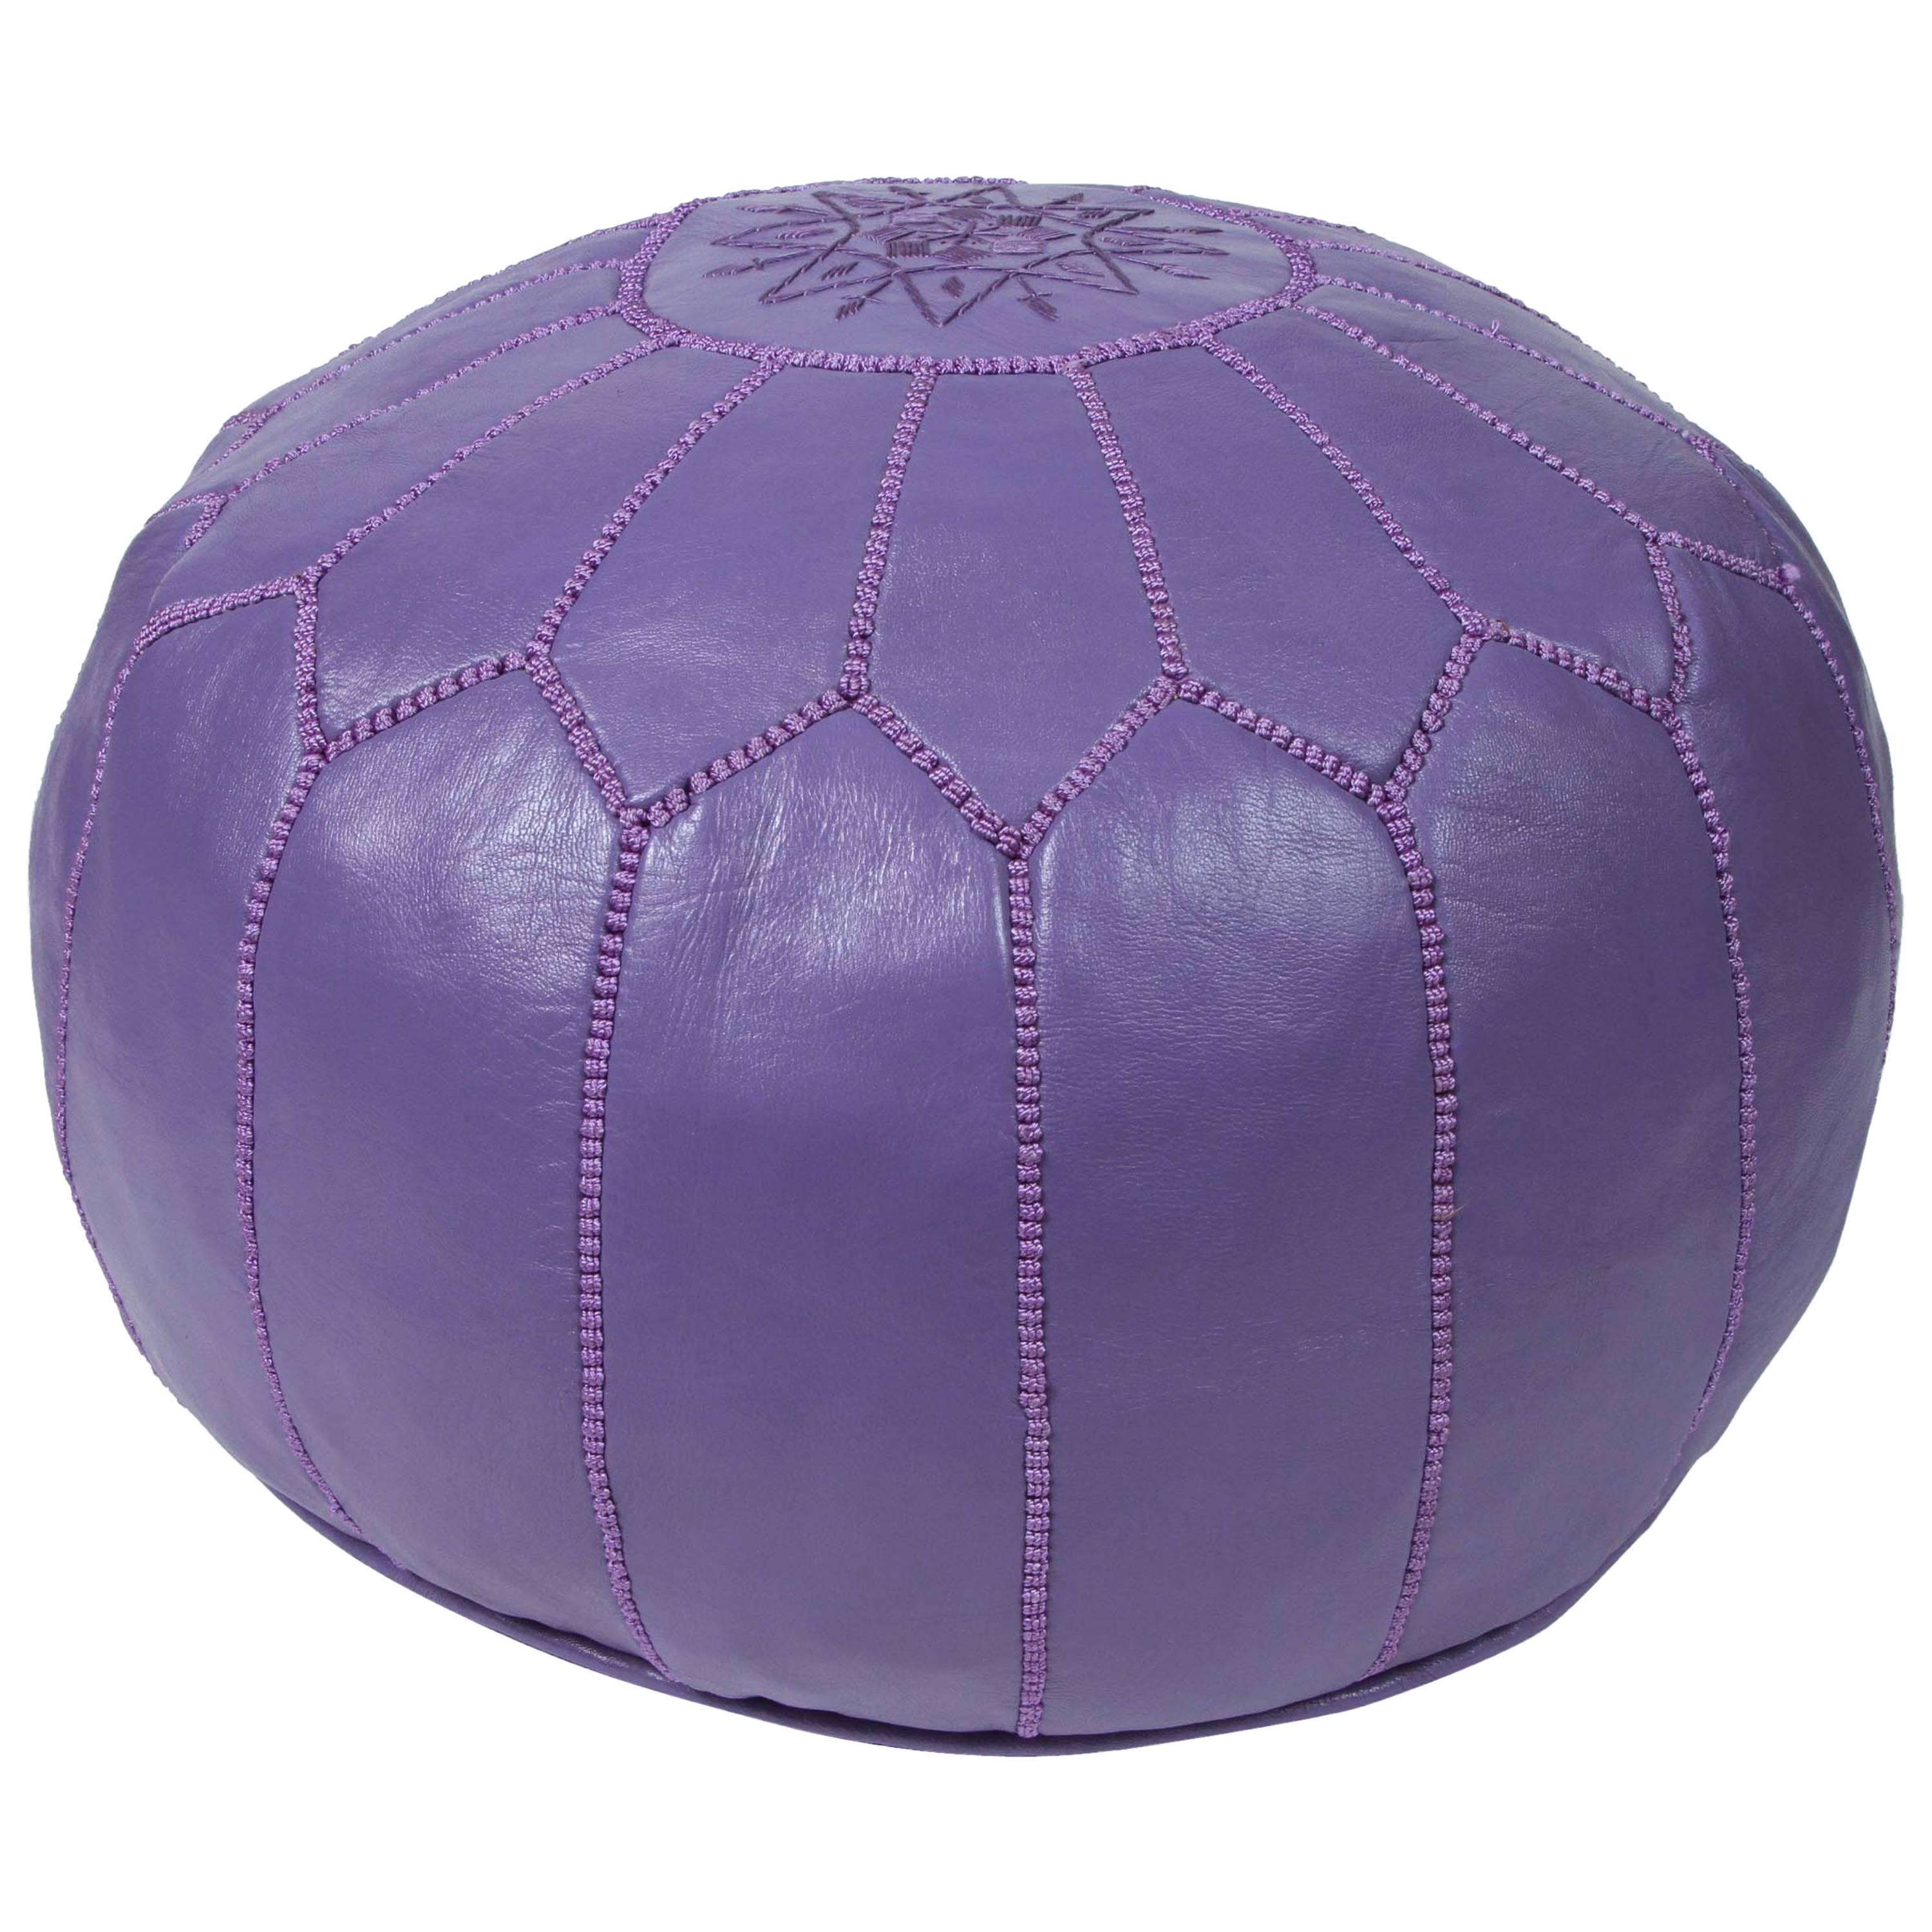 Hand-Tooled Moroccan Lavender Color Leather Pouf